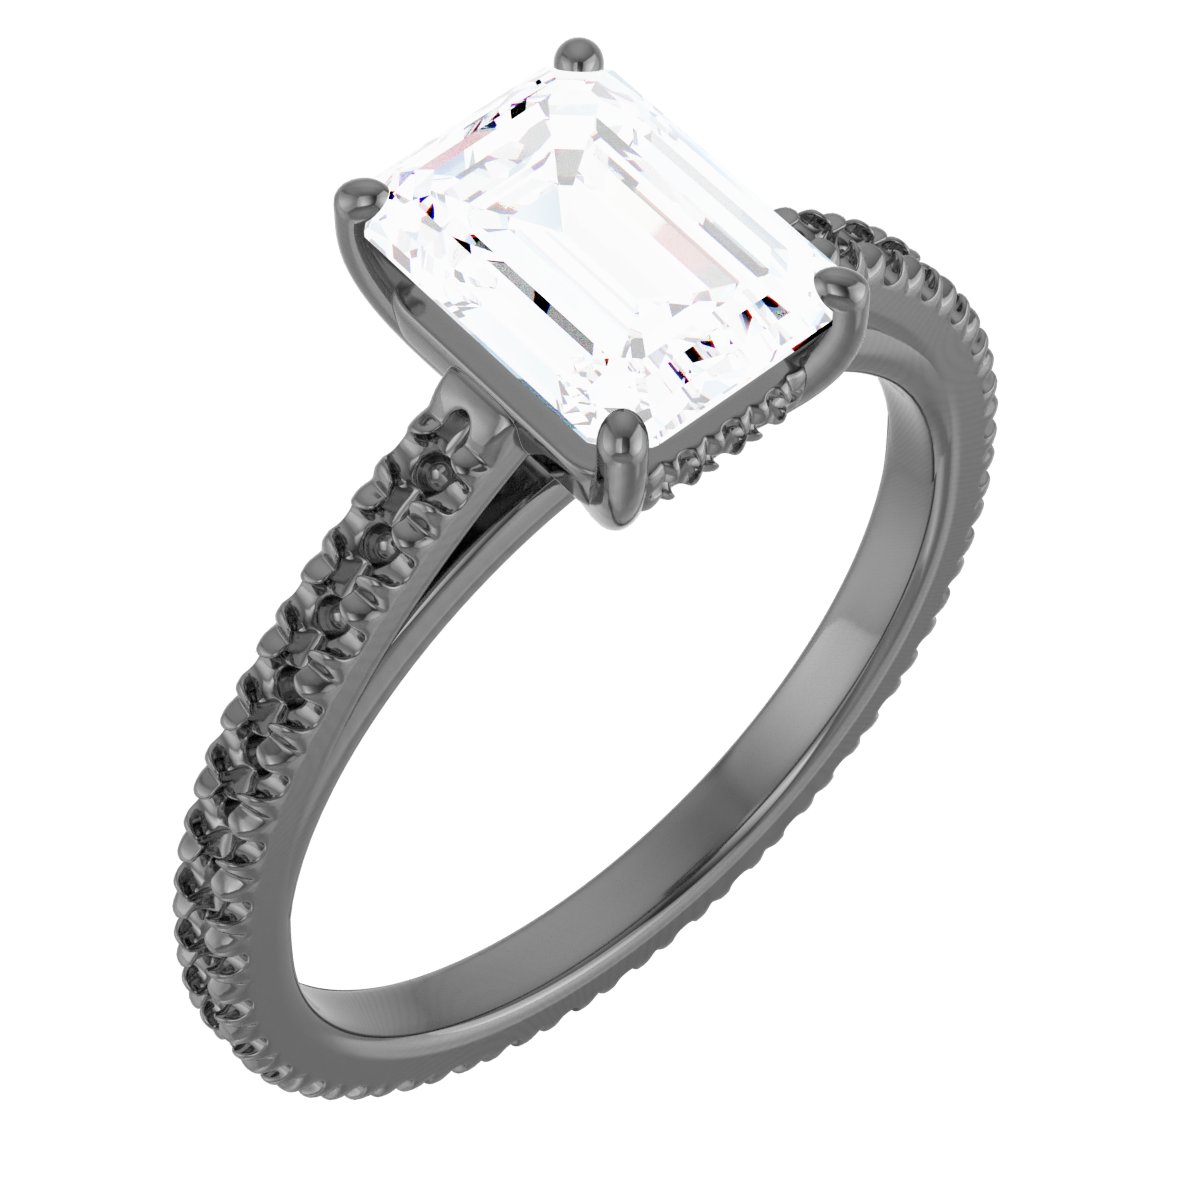 124009 / Neosadený / Continuum Sterling Silver / Cushion / 6 X 6 Mm / 5 / Polished / Engagement Ring Mounting